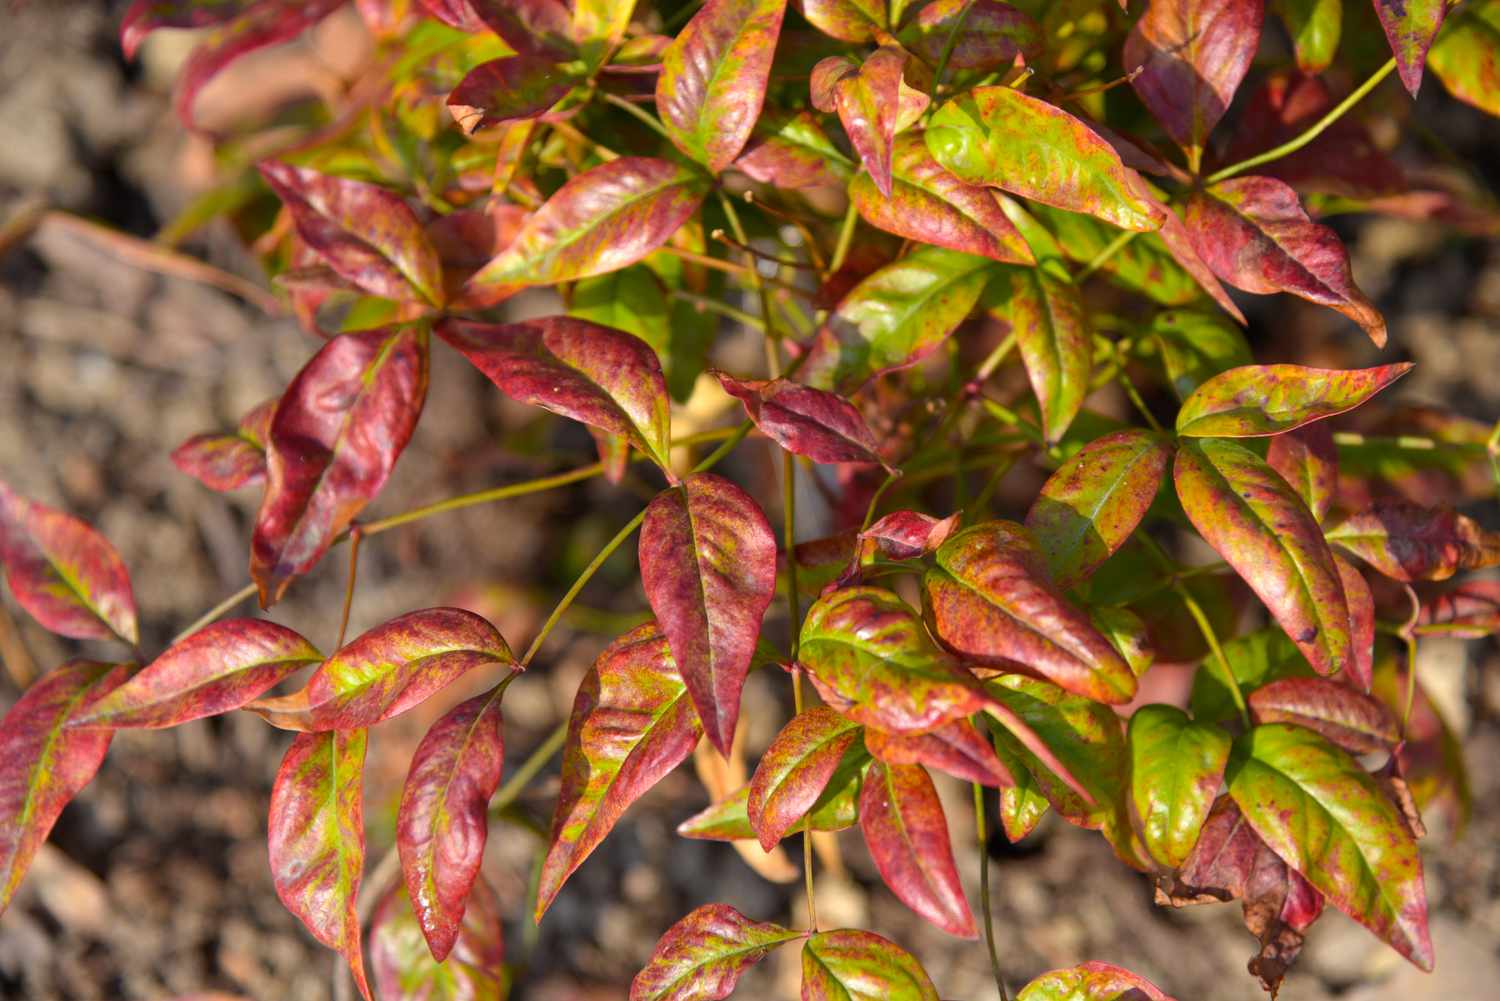 Firepower nandina plant with red and green leaves on thin stems closeup